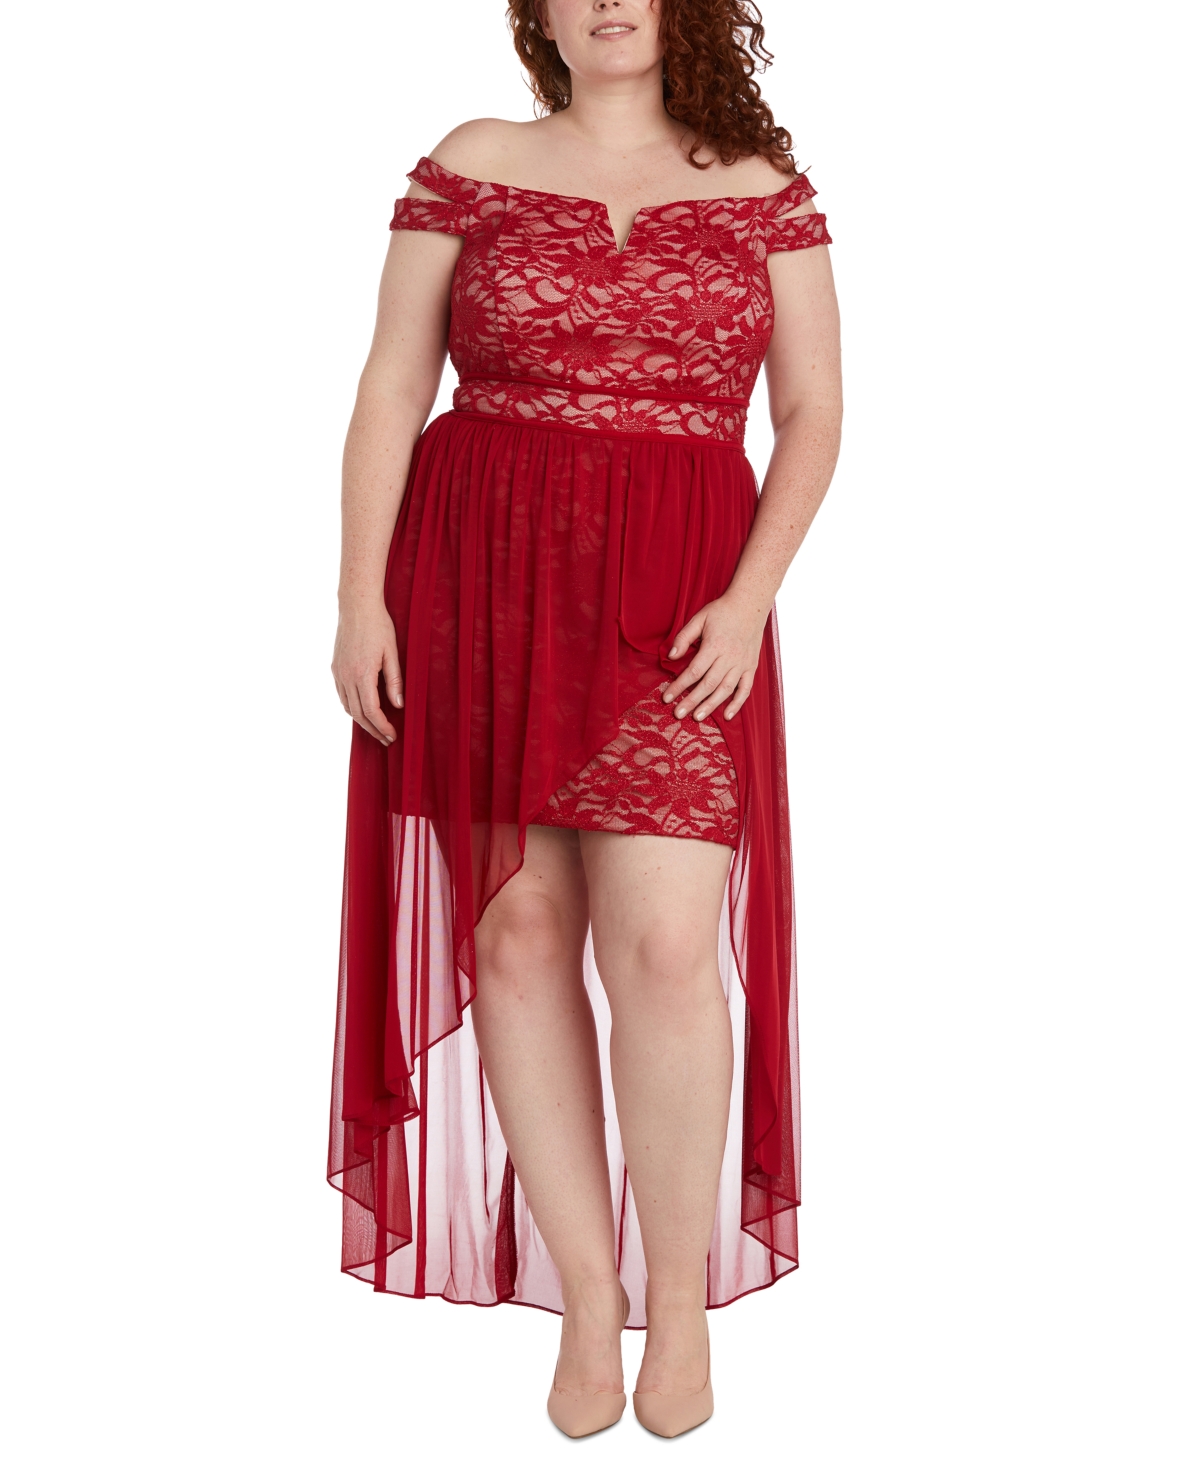 Trendy Plus Size Lace Off-The-Shoulder Dress - Red/Nude